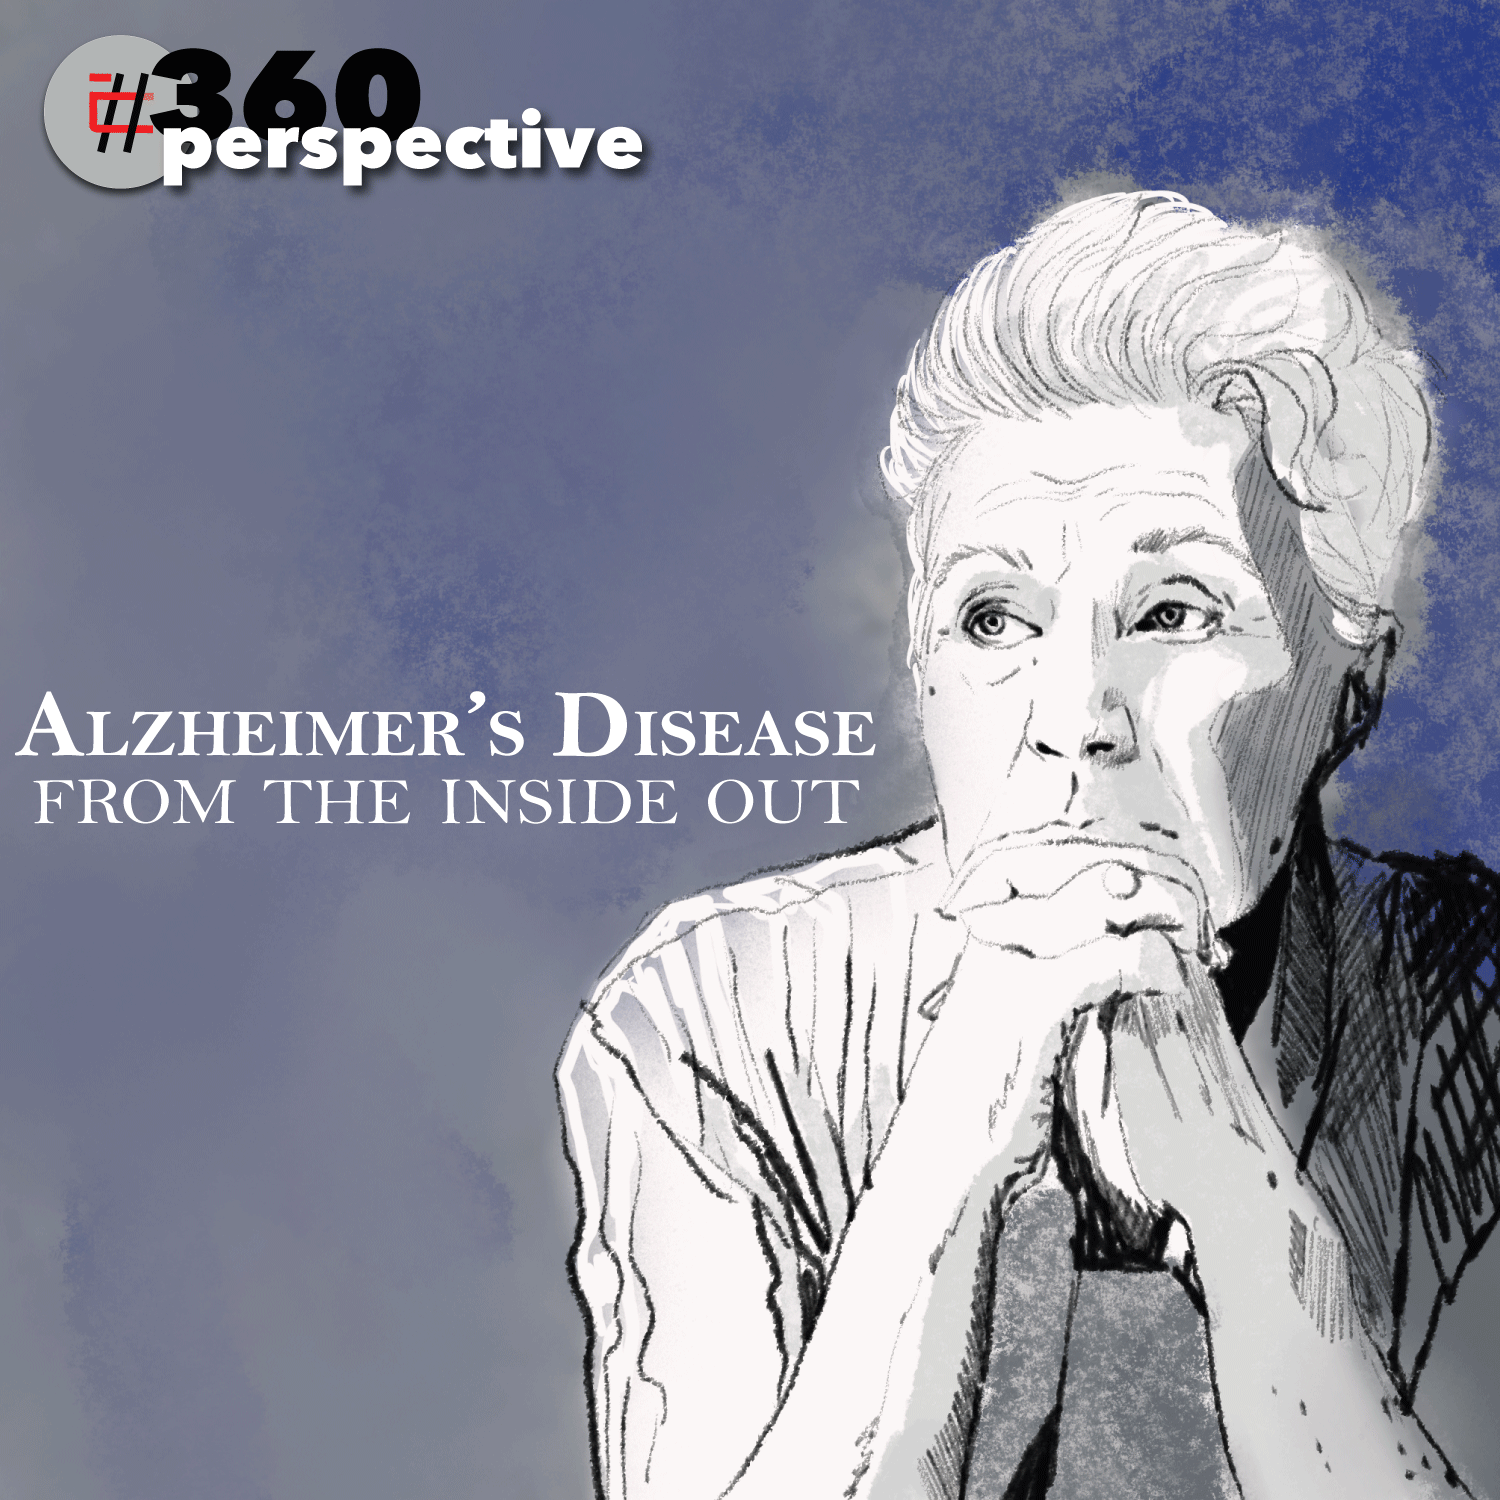 Alzheimer’s Disease from the Inside Out